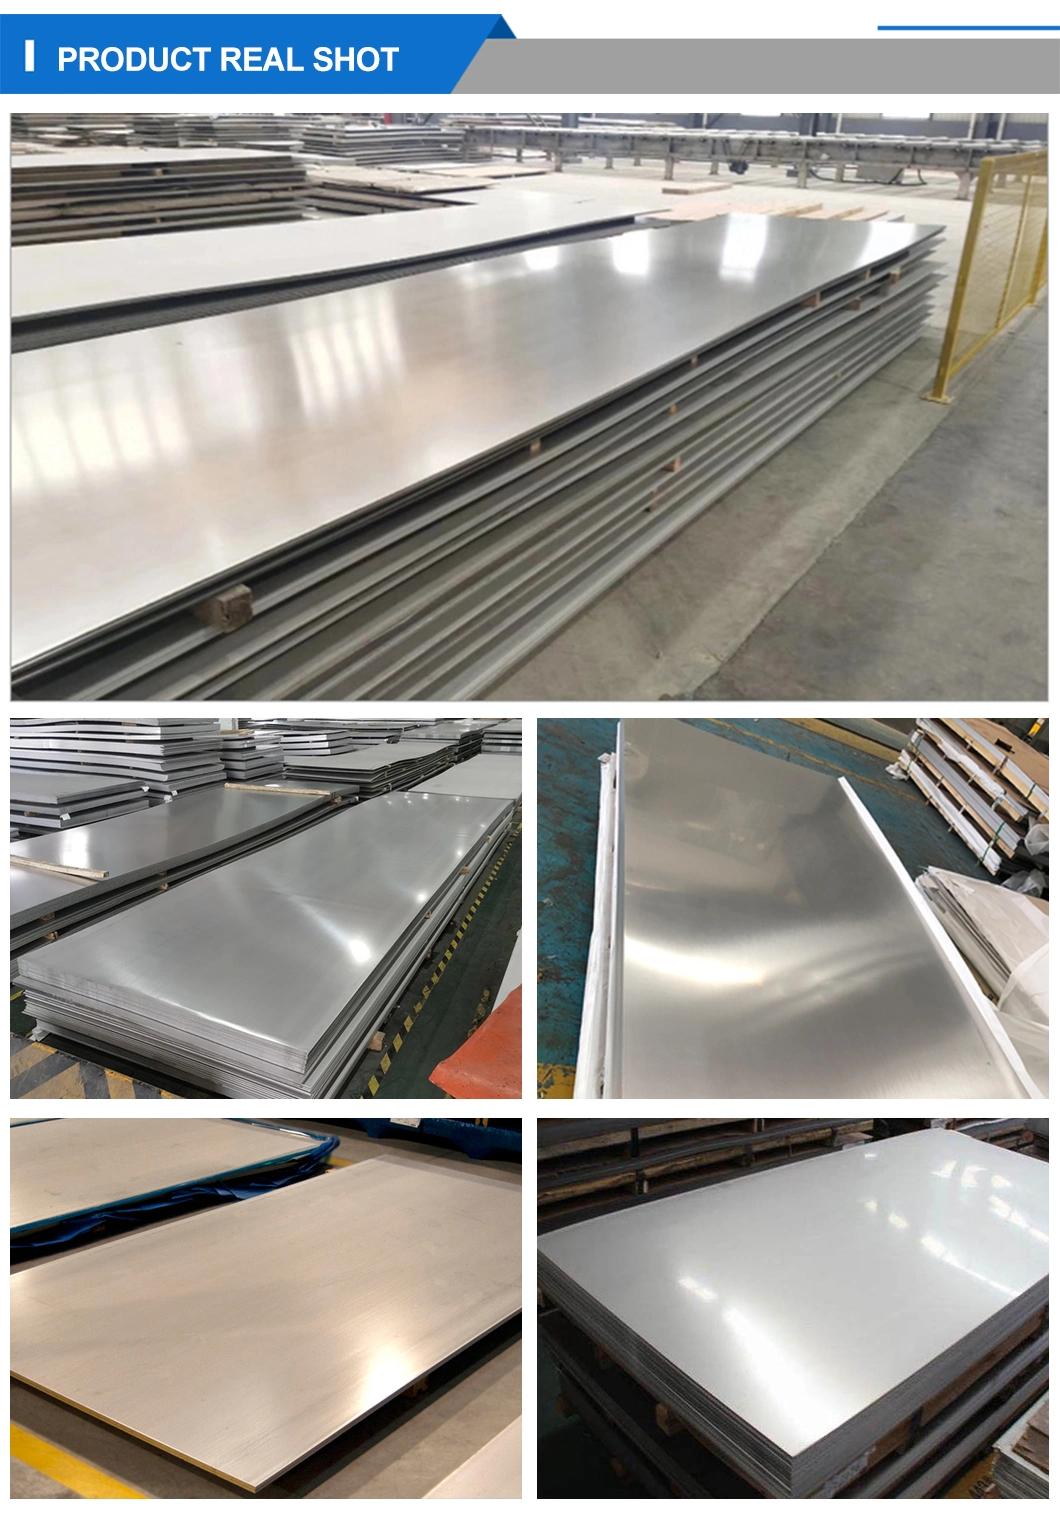 AISI 409L, 410, 410s, 420, 420j1, 420j2, 430, 444, 441 Hot Rolled Steel Sheets Stainless Steel Plate